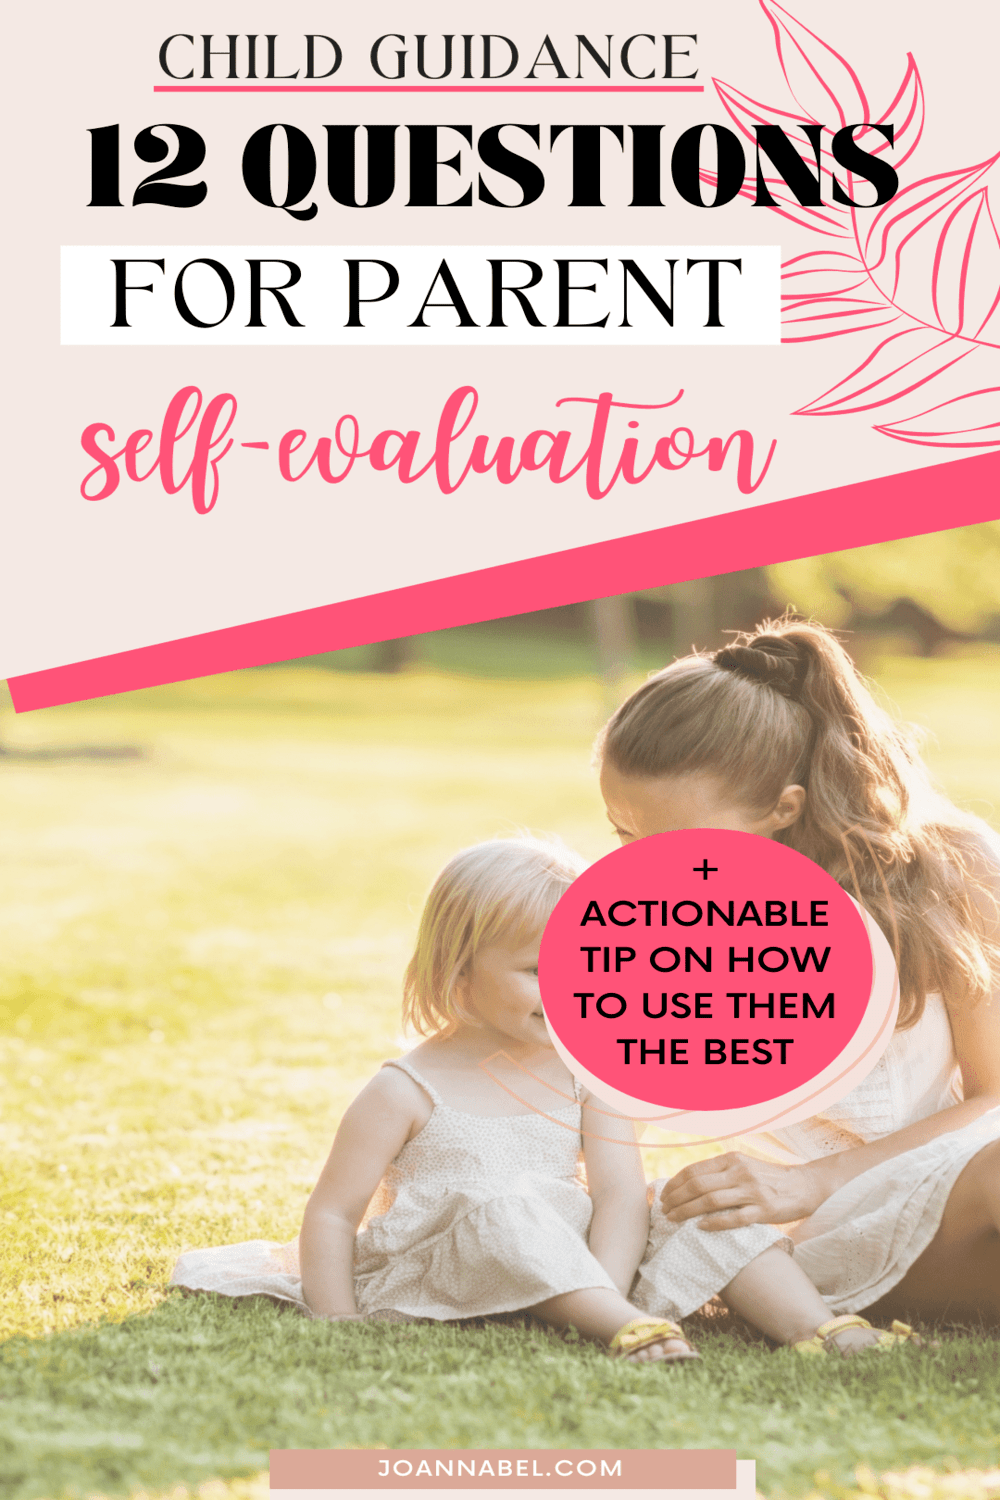 Pin image with text - Child guidance, 12 questions for parent self-evaluation - in front and a photo of a mom and a little girl sitting on the grass and looking at a book